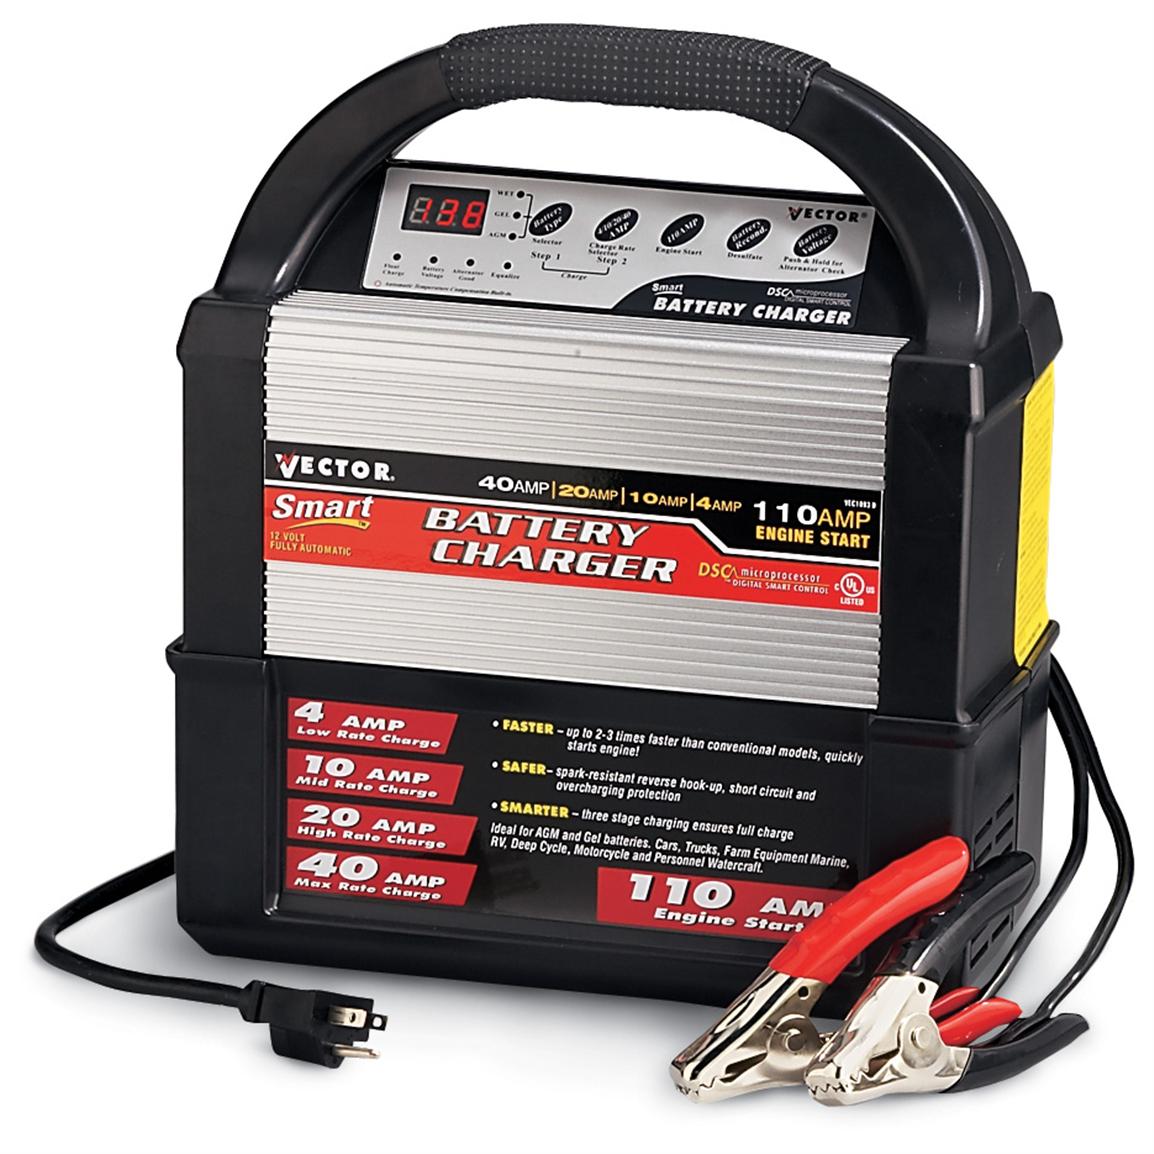 Vector® 12 - volt Smart Battery Charger - 129267, Chargers & Jump